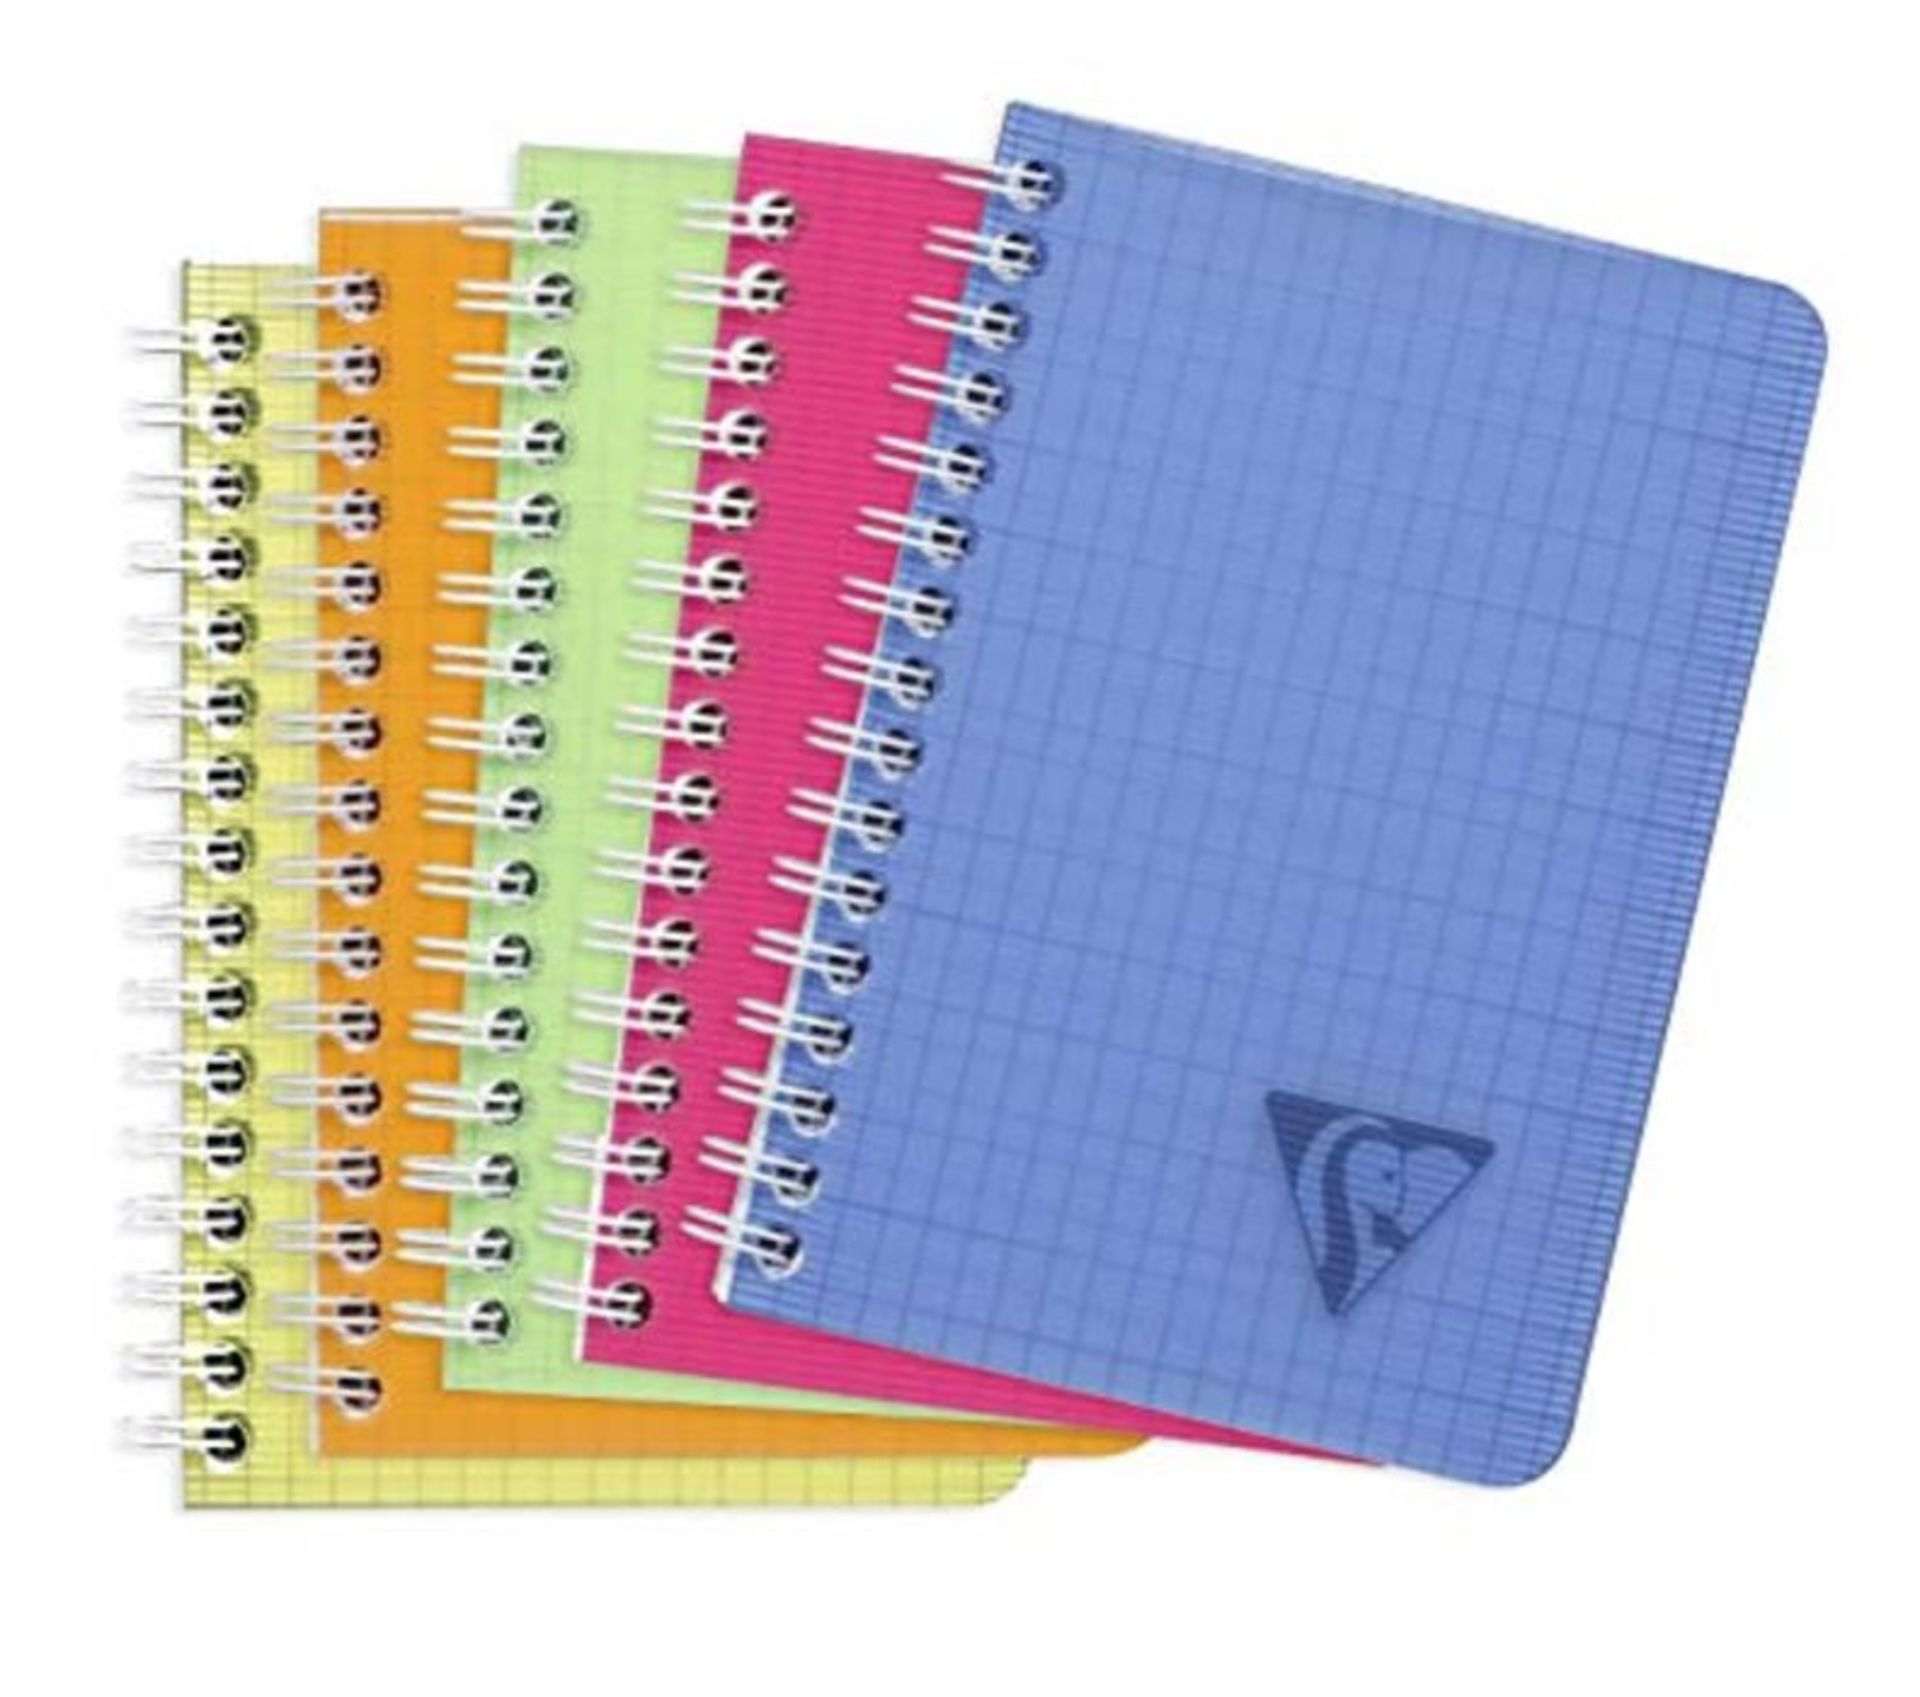 COMBINED RRP £418.00 LOT TO CONTAIN 50 ASSORTED Tech Products: GOGME, Post-it, Maped, Maped, Br - Image 30 of 51